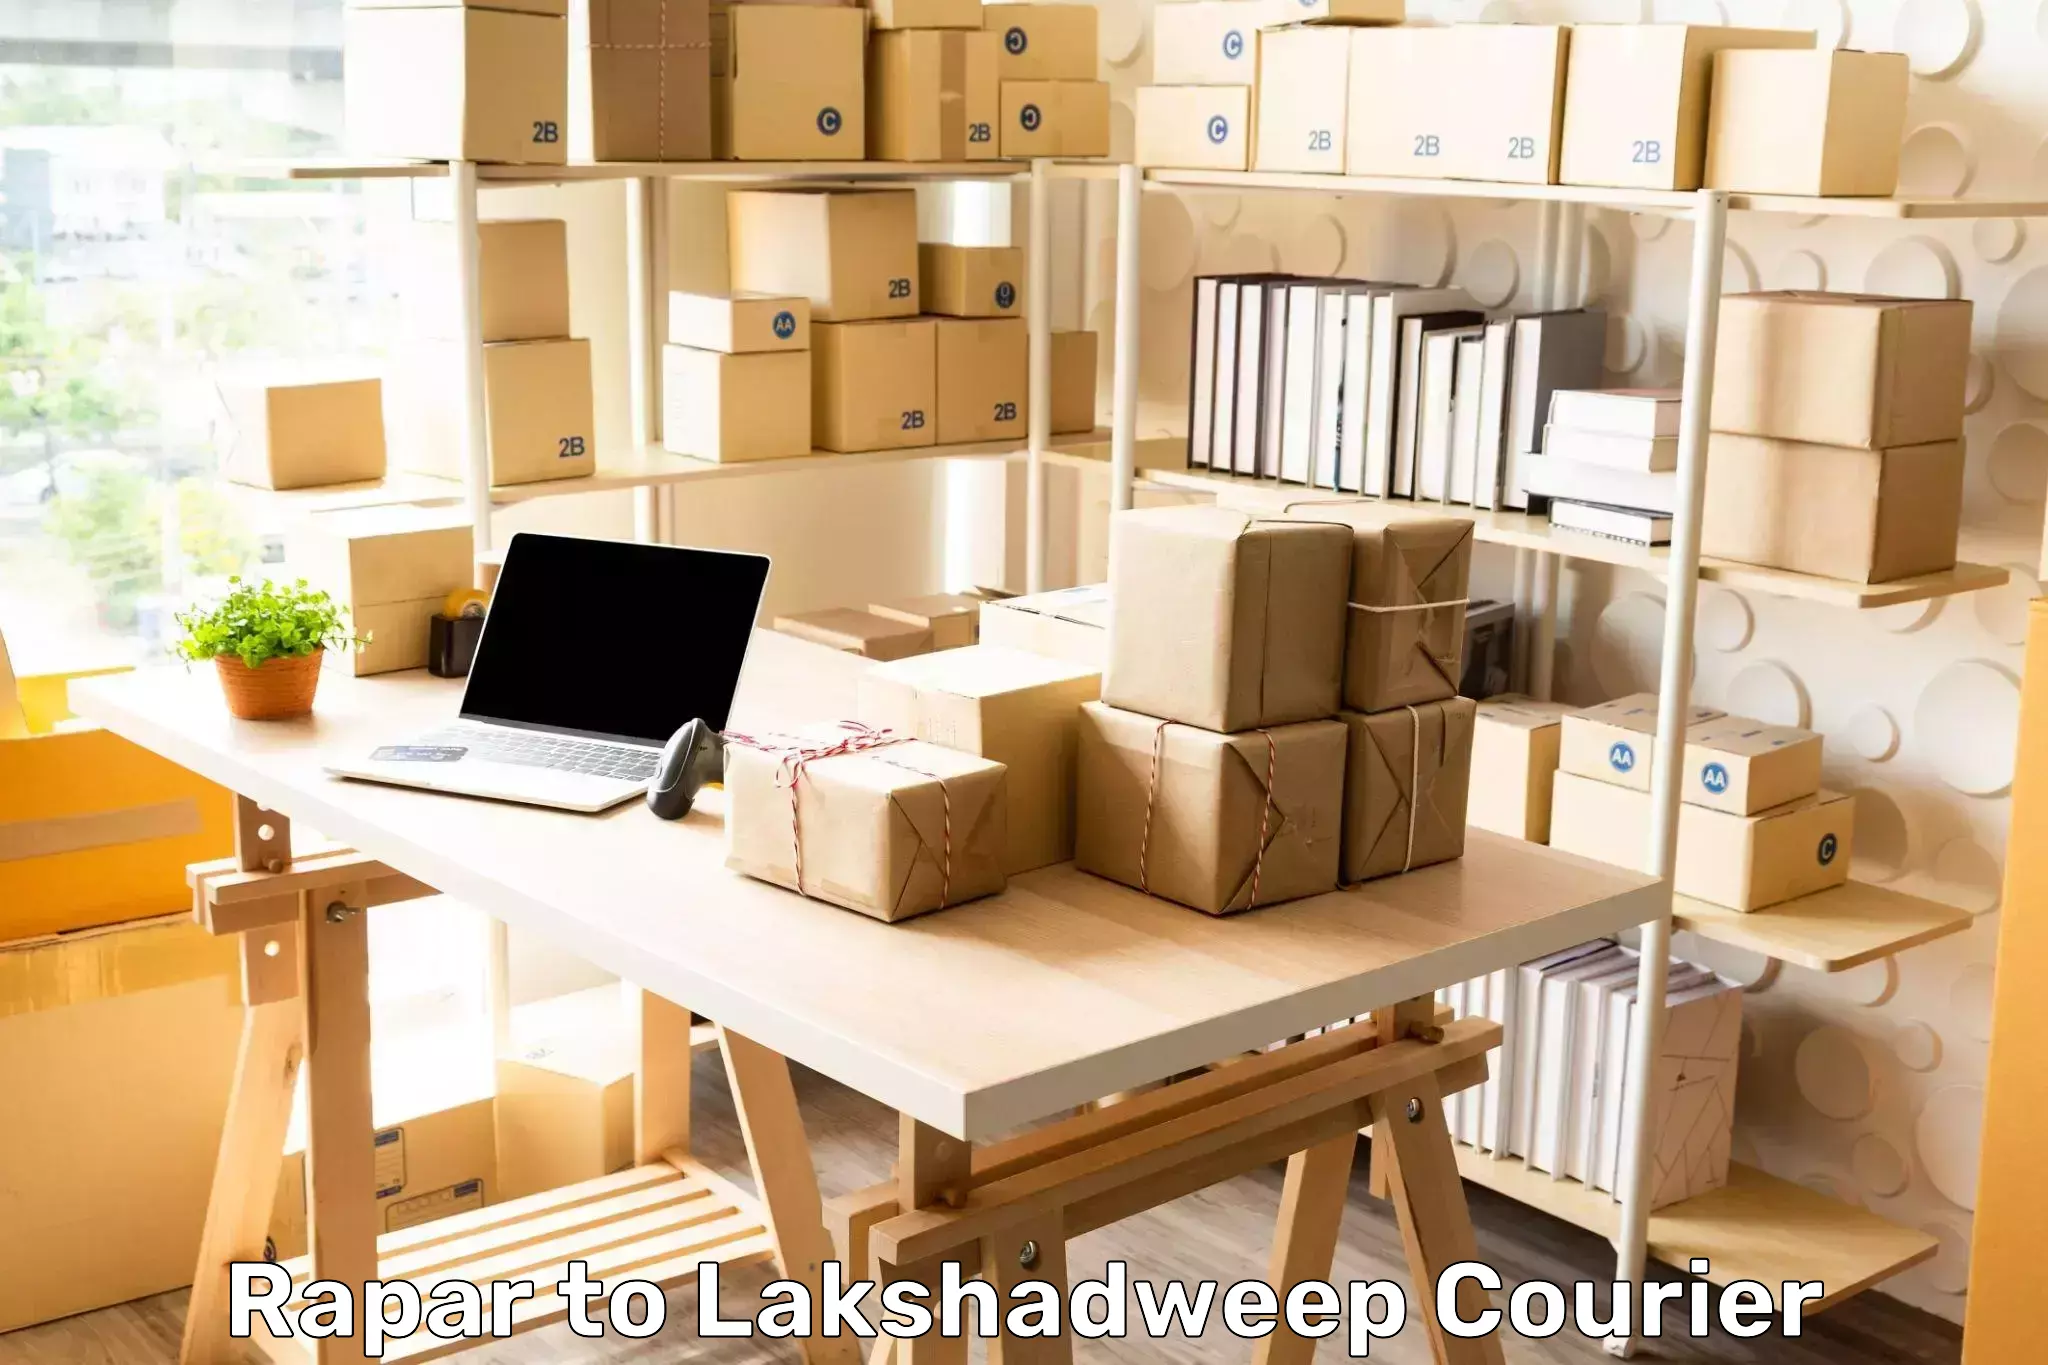 Discount courier rates Rapar to Lakshadweep